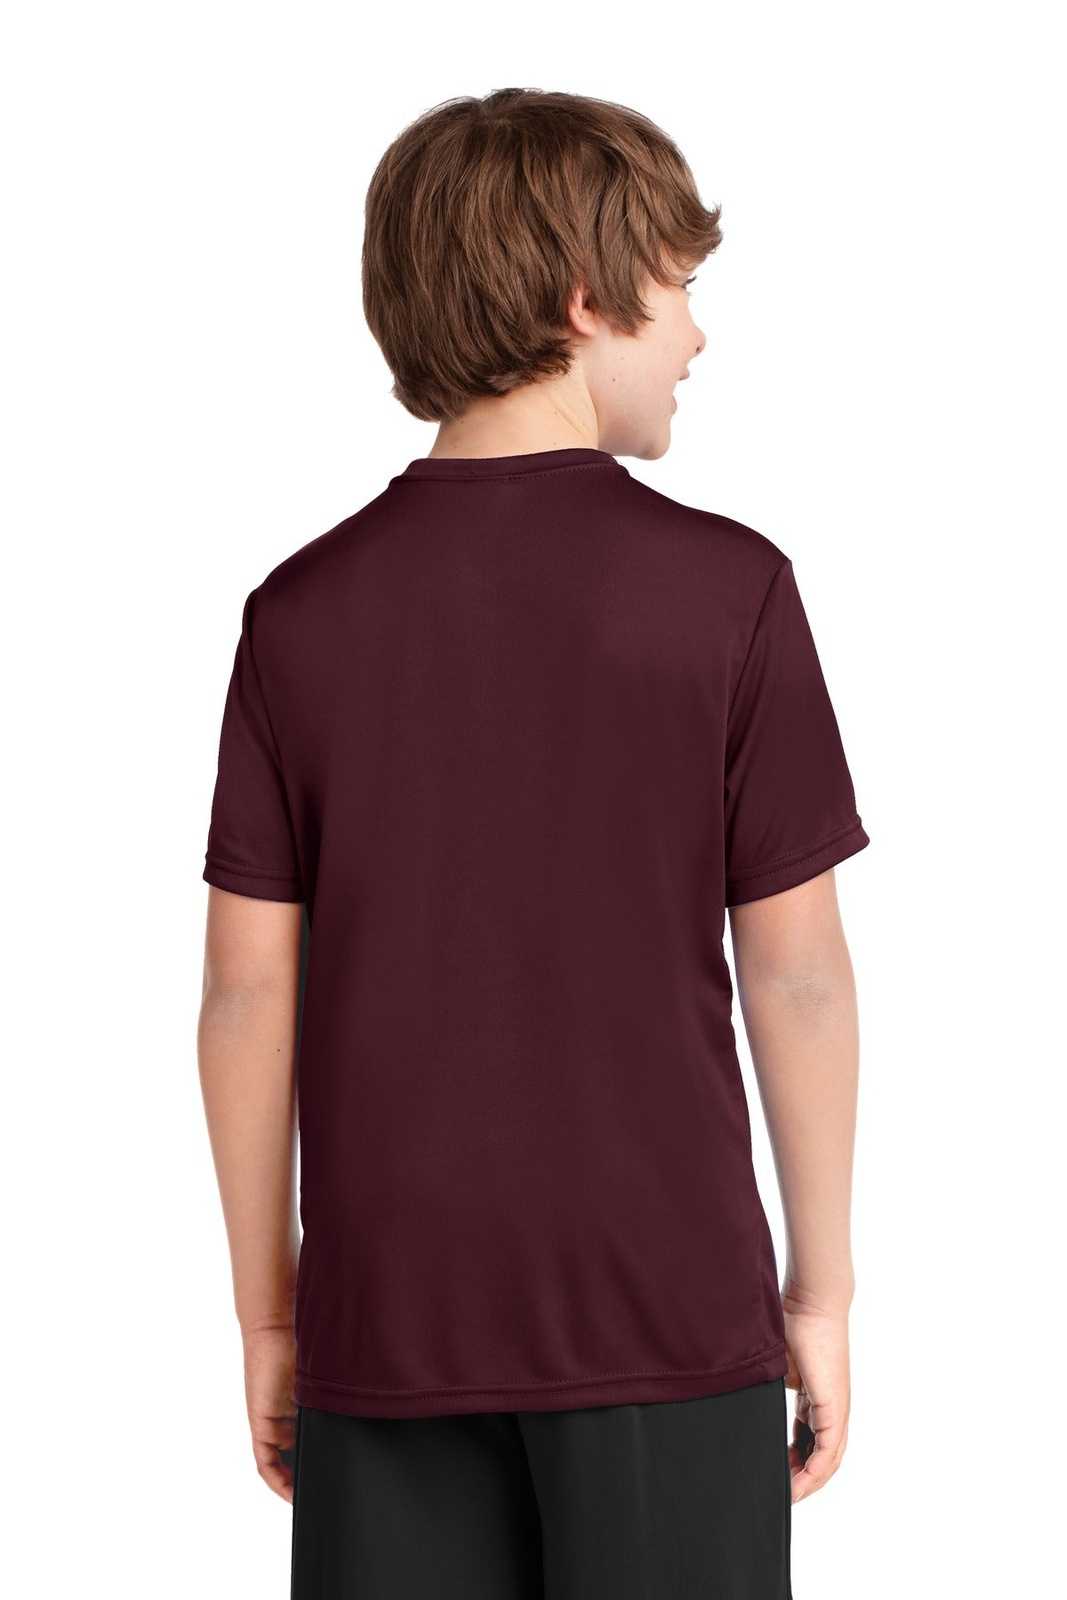 Port & Company PC380Y Youth Performance Tee - Athletic Maroon - HIT a Double - 1